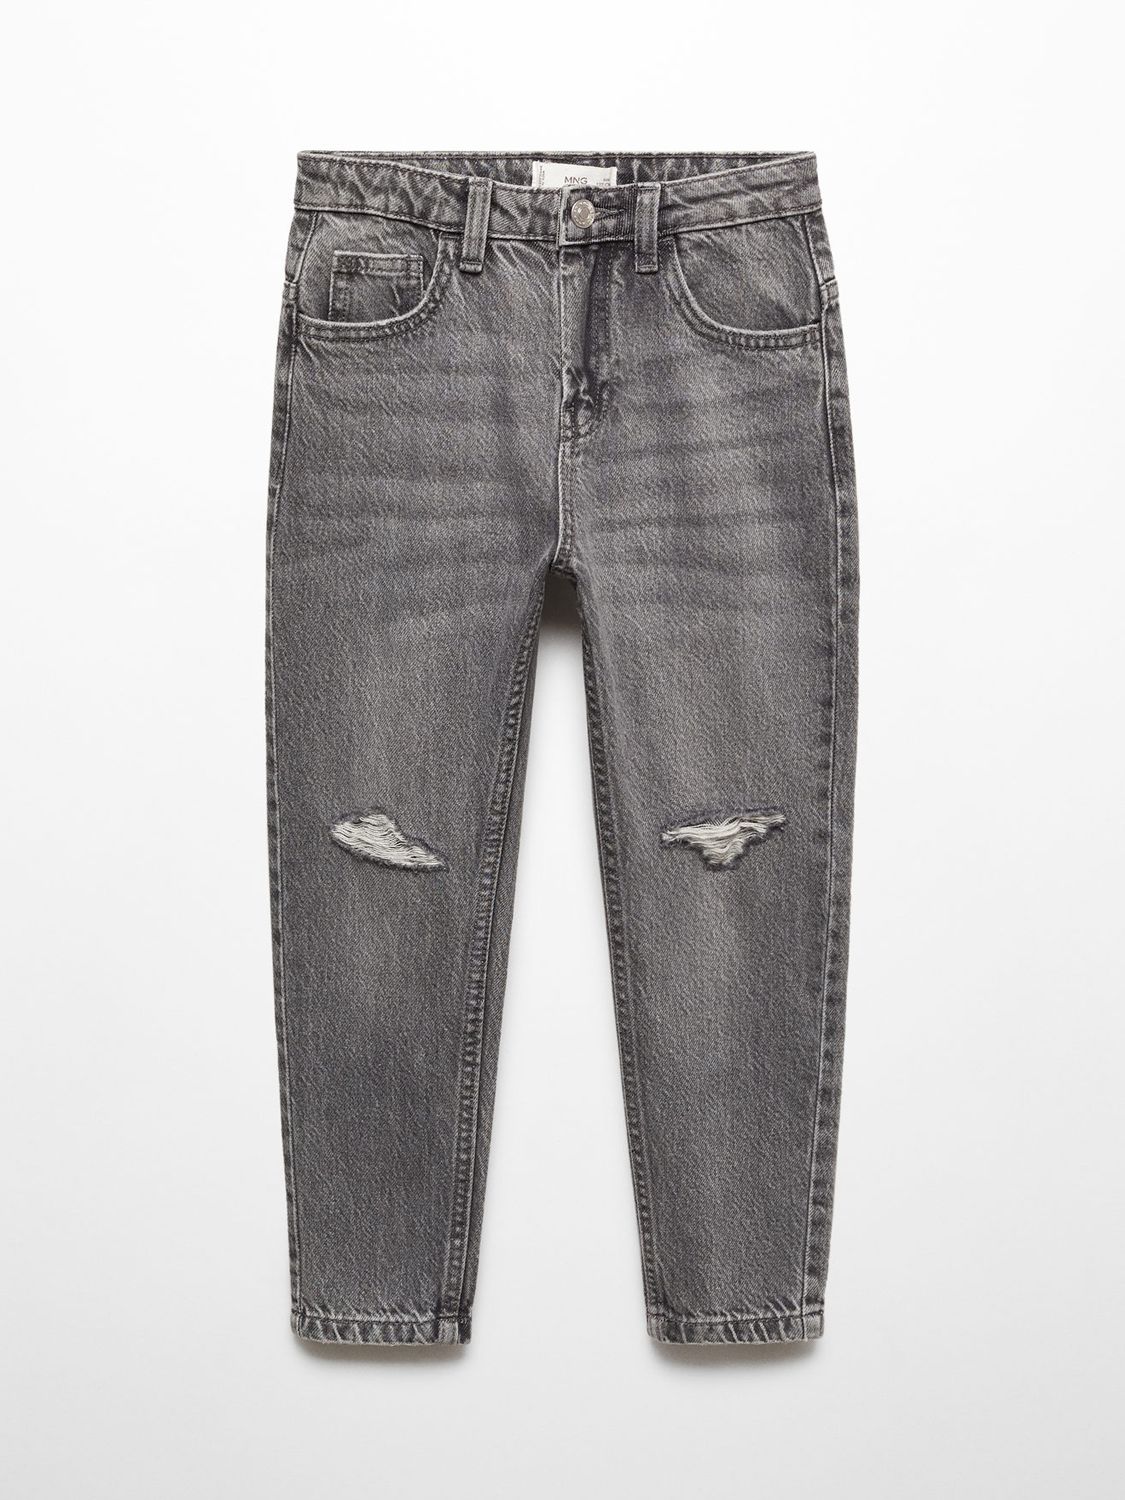 Mango Kids' Dad Decorative Ripped Jeans, Open Grey at John Lewis & Partners